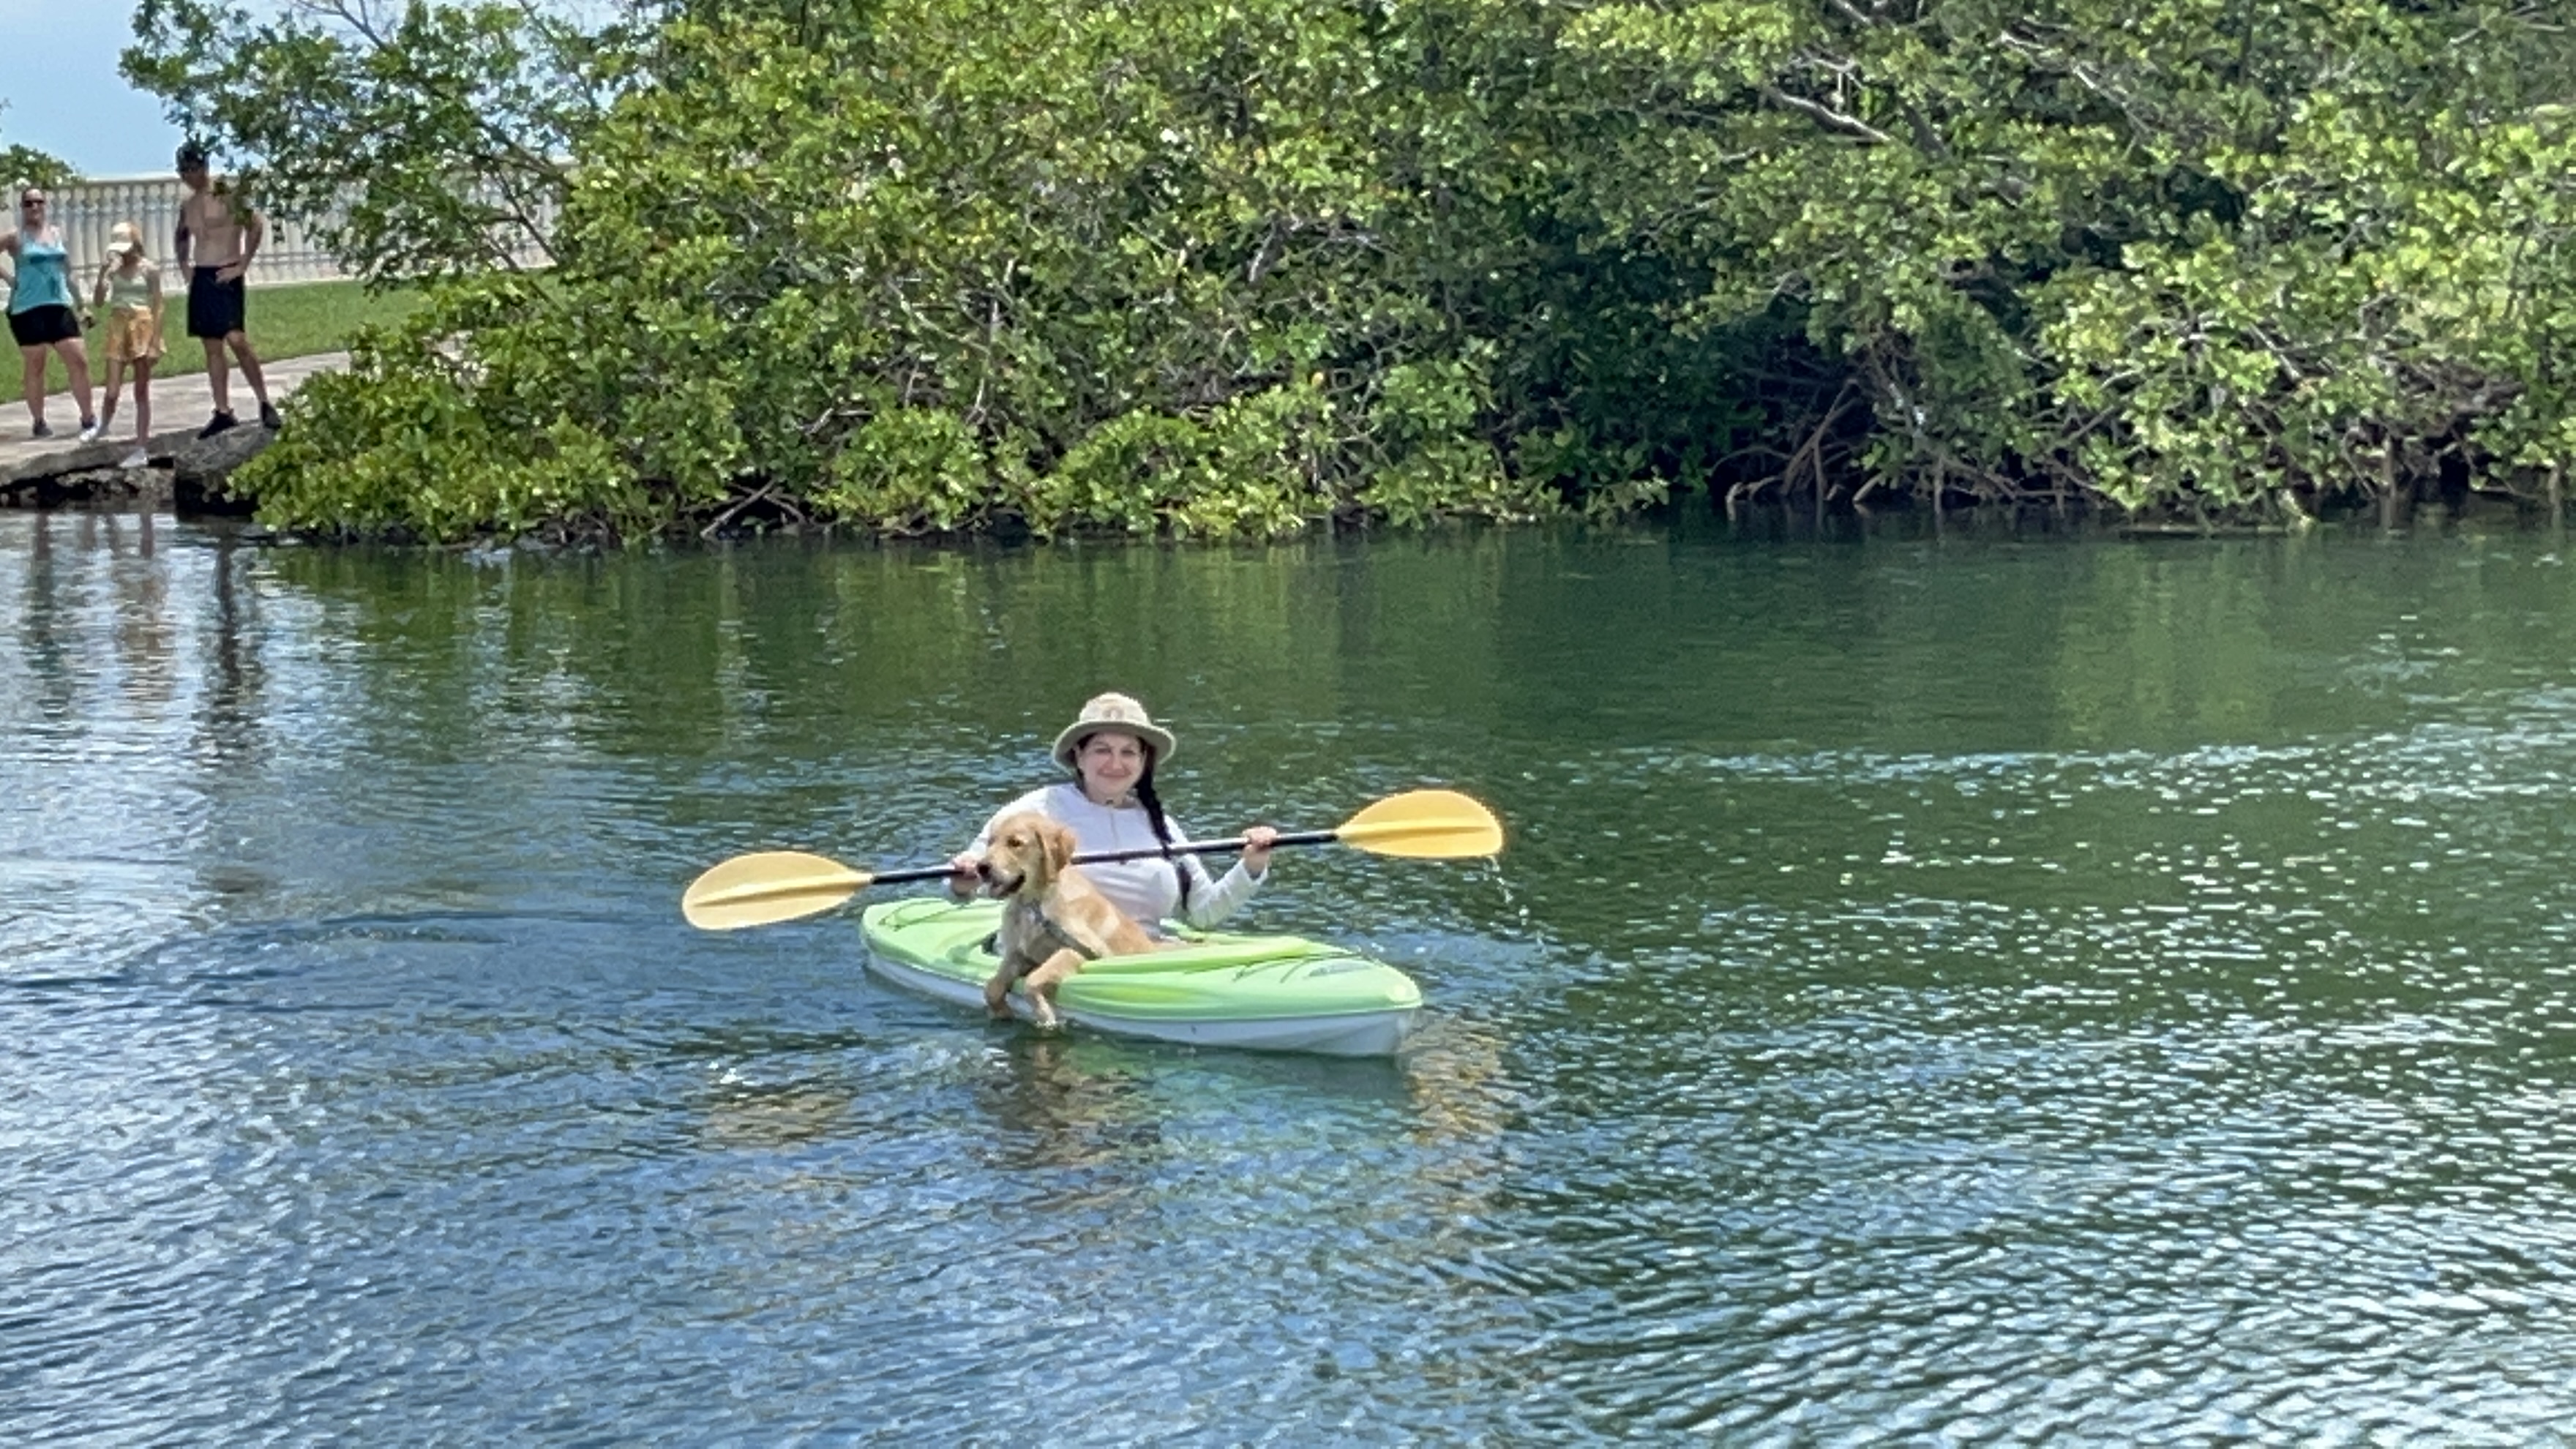 Blaire and her dog kayaking